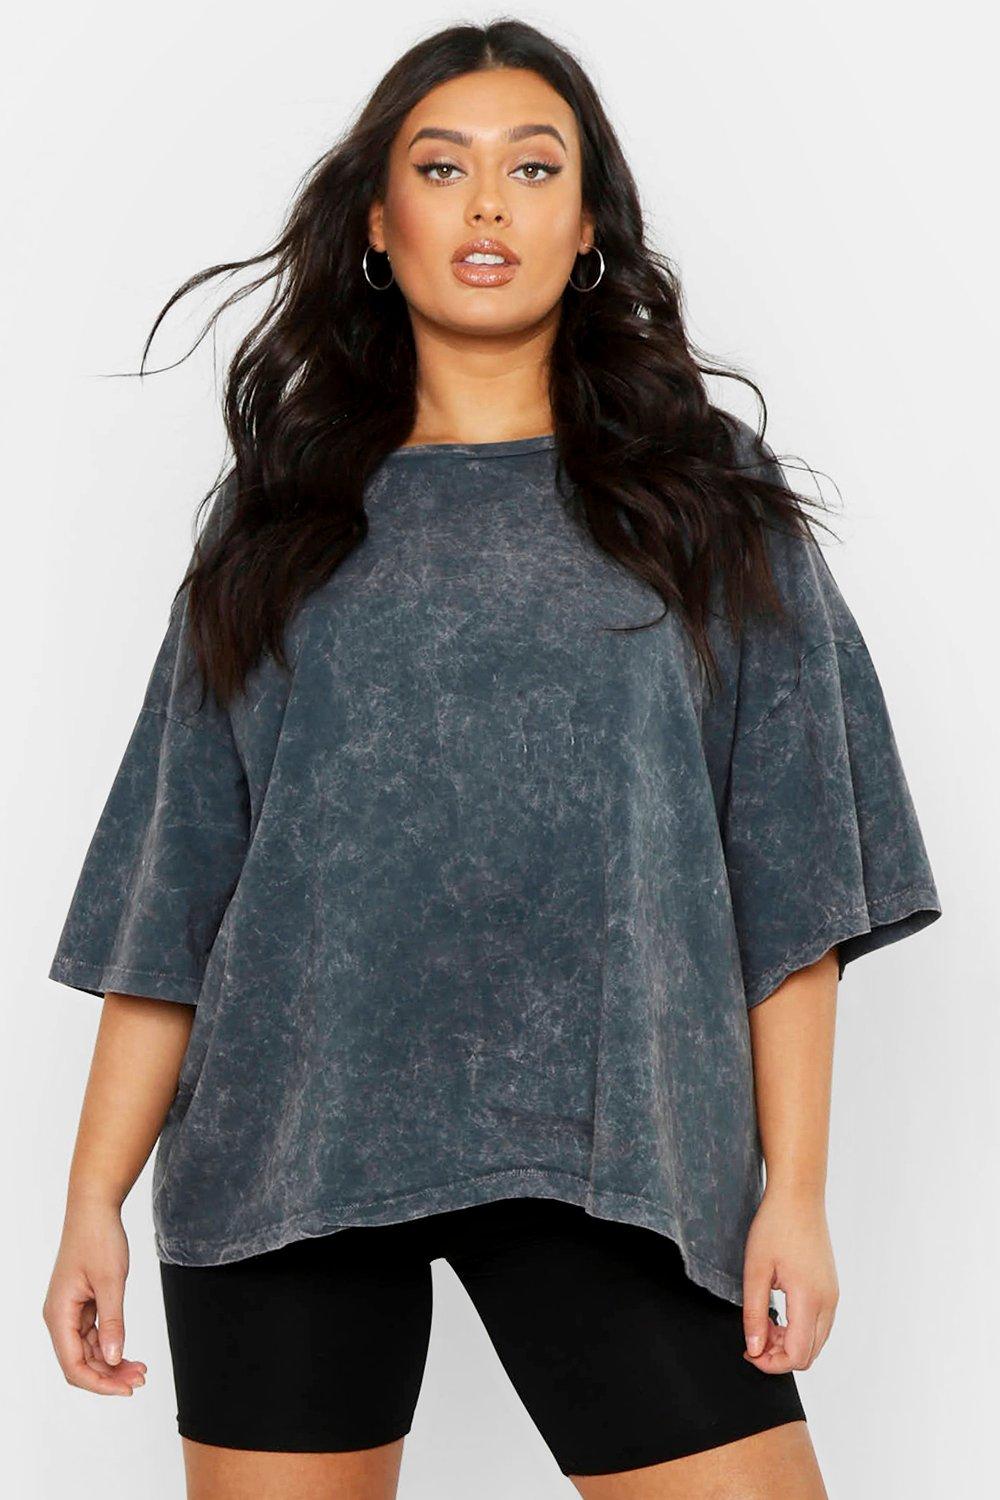 Grey cotton top Women gift Grey Oversized Top Grey top Grey Plus Size Blouse Oversized top Plus size top XL top Grey blouse